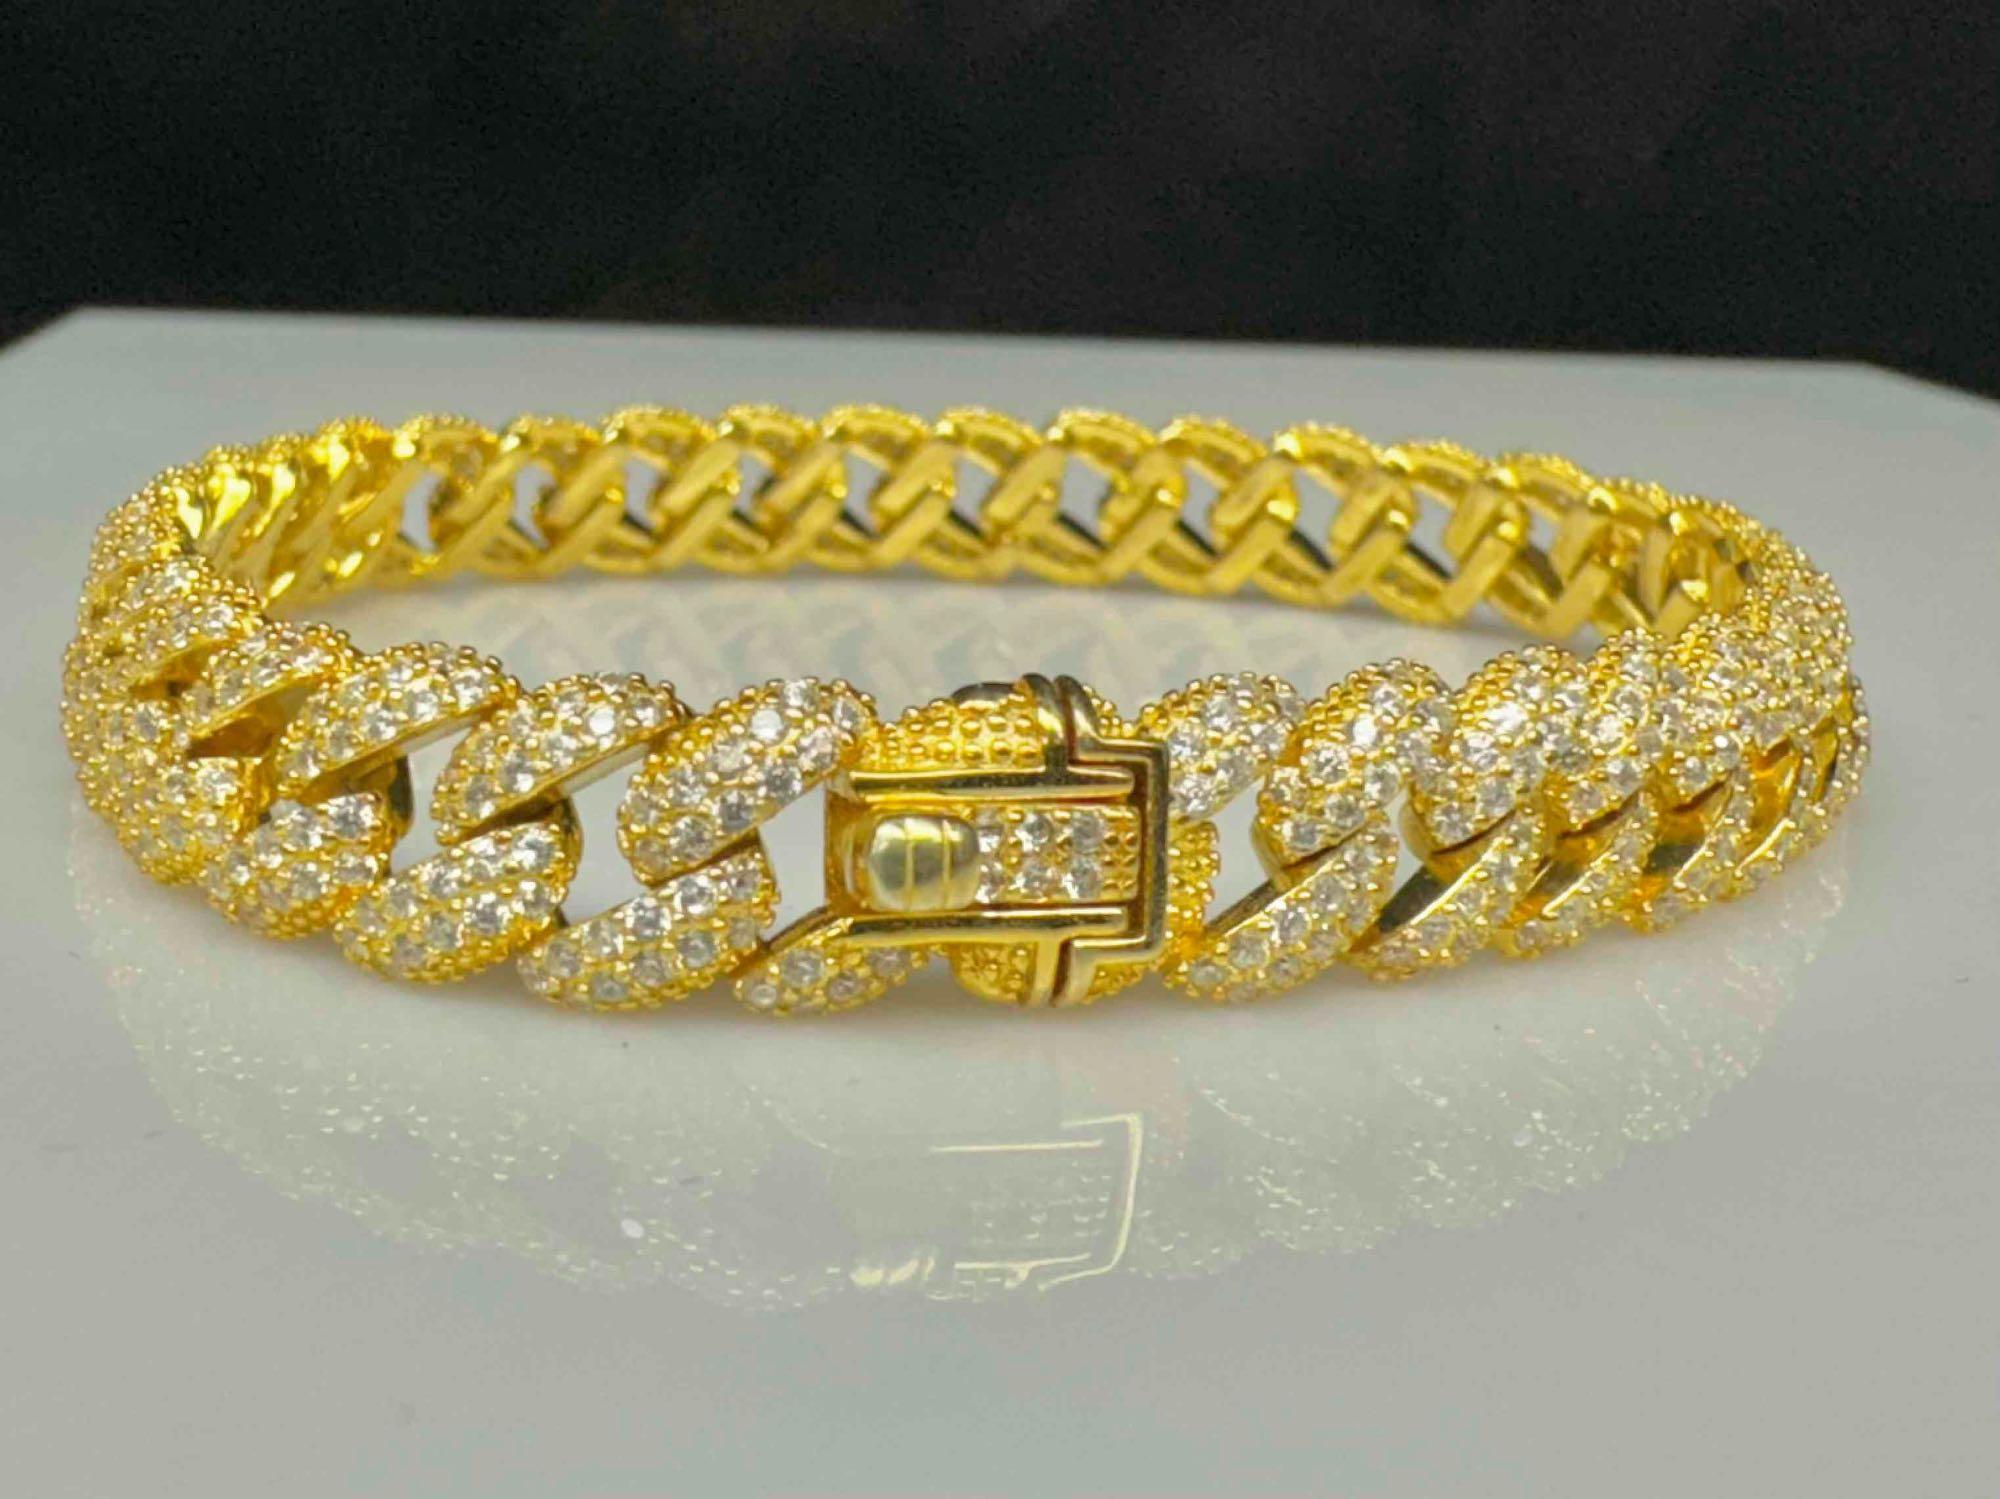 14k Gold Plated s925 Sterling Silver Bracelet with Moissanite Diamonds 16.4g total